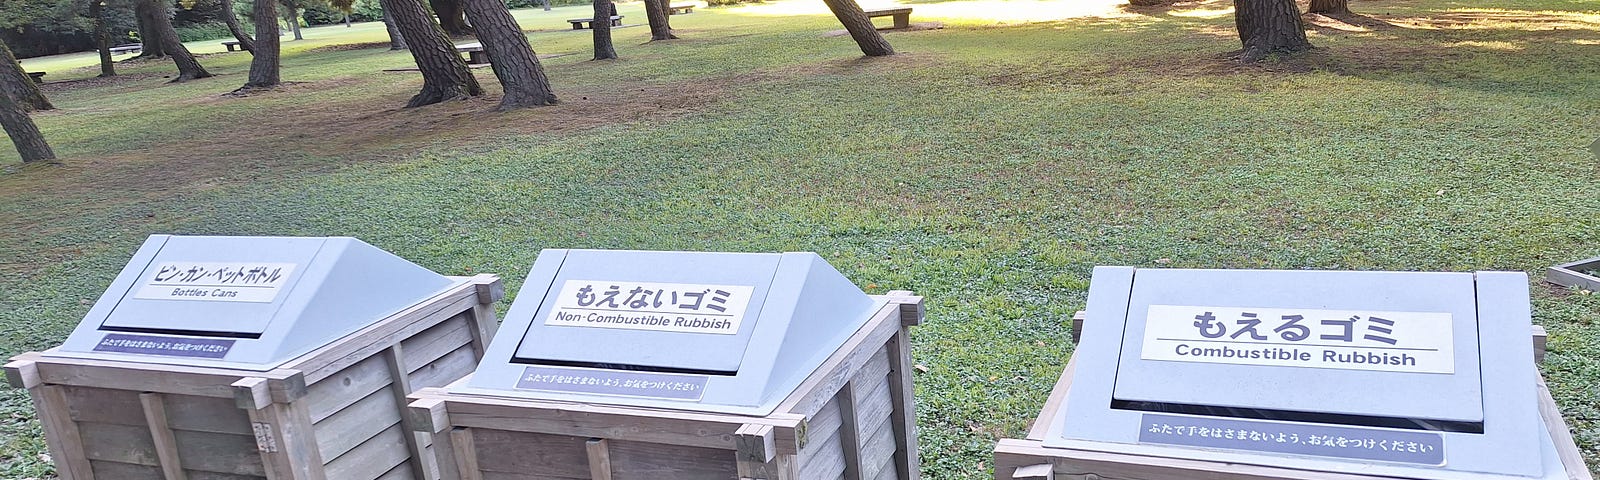 Three wooden rubbish box containers in a Tokyo park, Japan. Labelled bottles/cans, non-combustible and combustible, in Japanese and English.